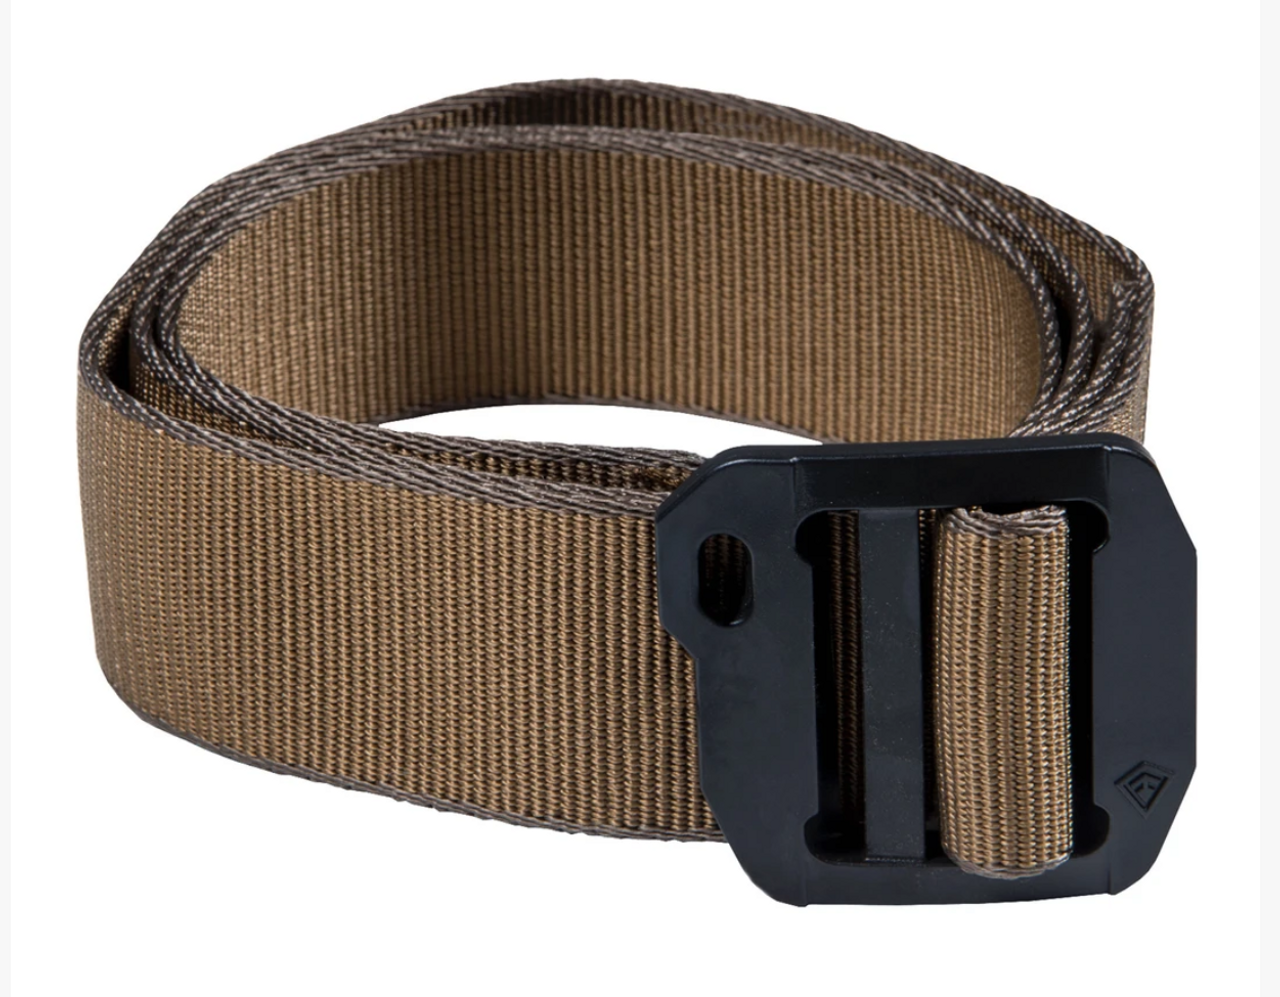 The BDU Belt 1.5” is designed to work for you. From its extra durable non-metal buckle, to pre-curved nylon webbing for comfort, this belt sets the bar high.